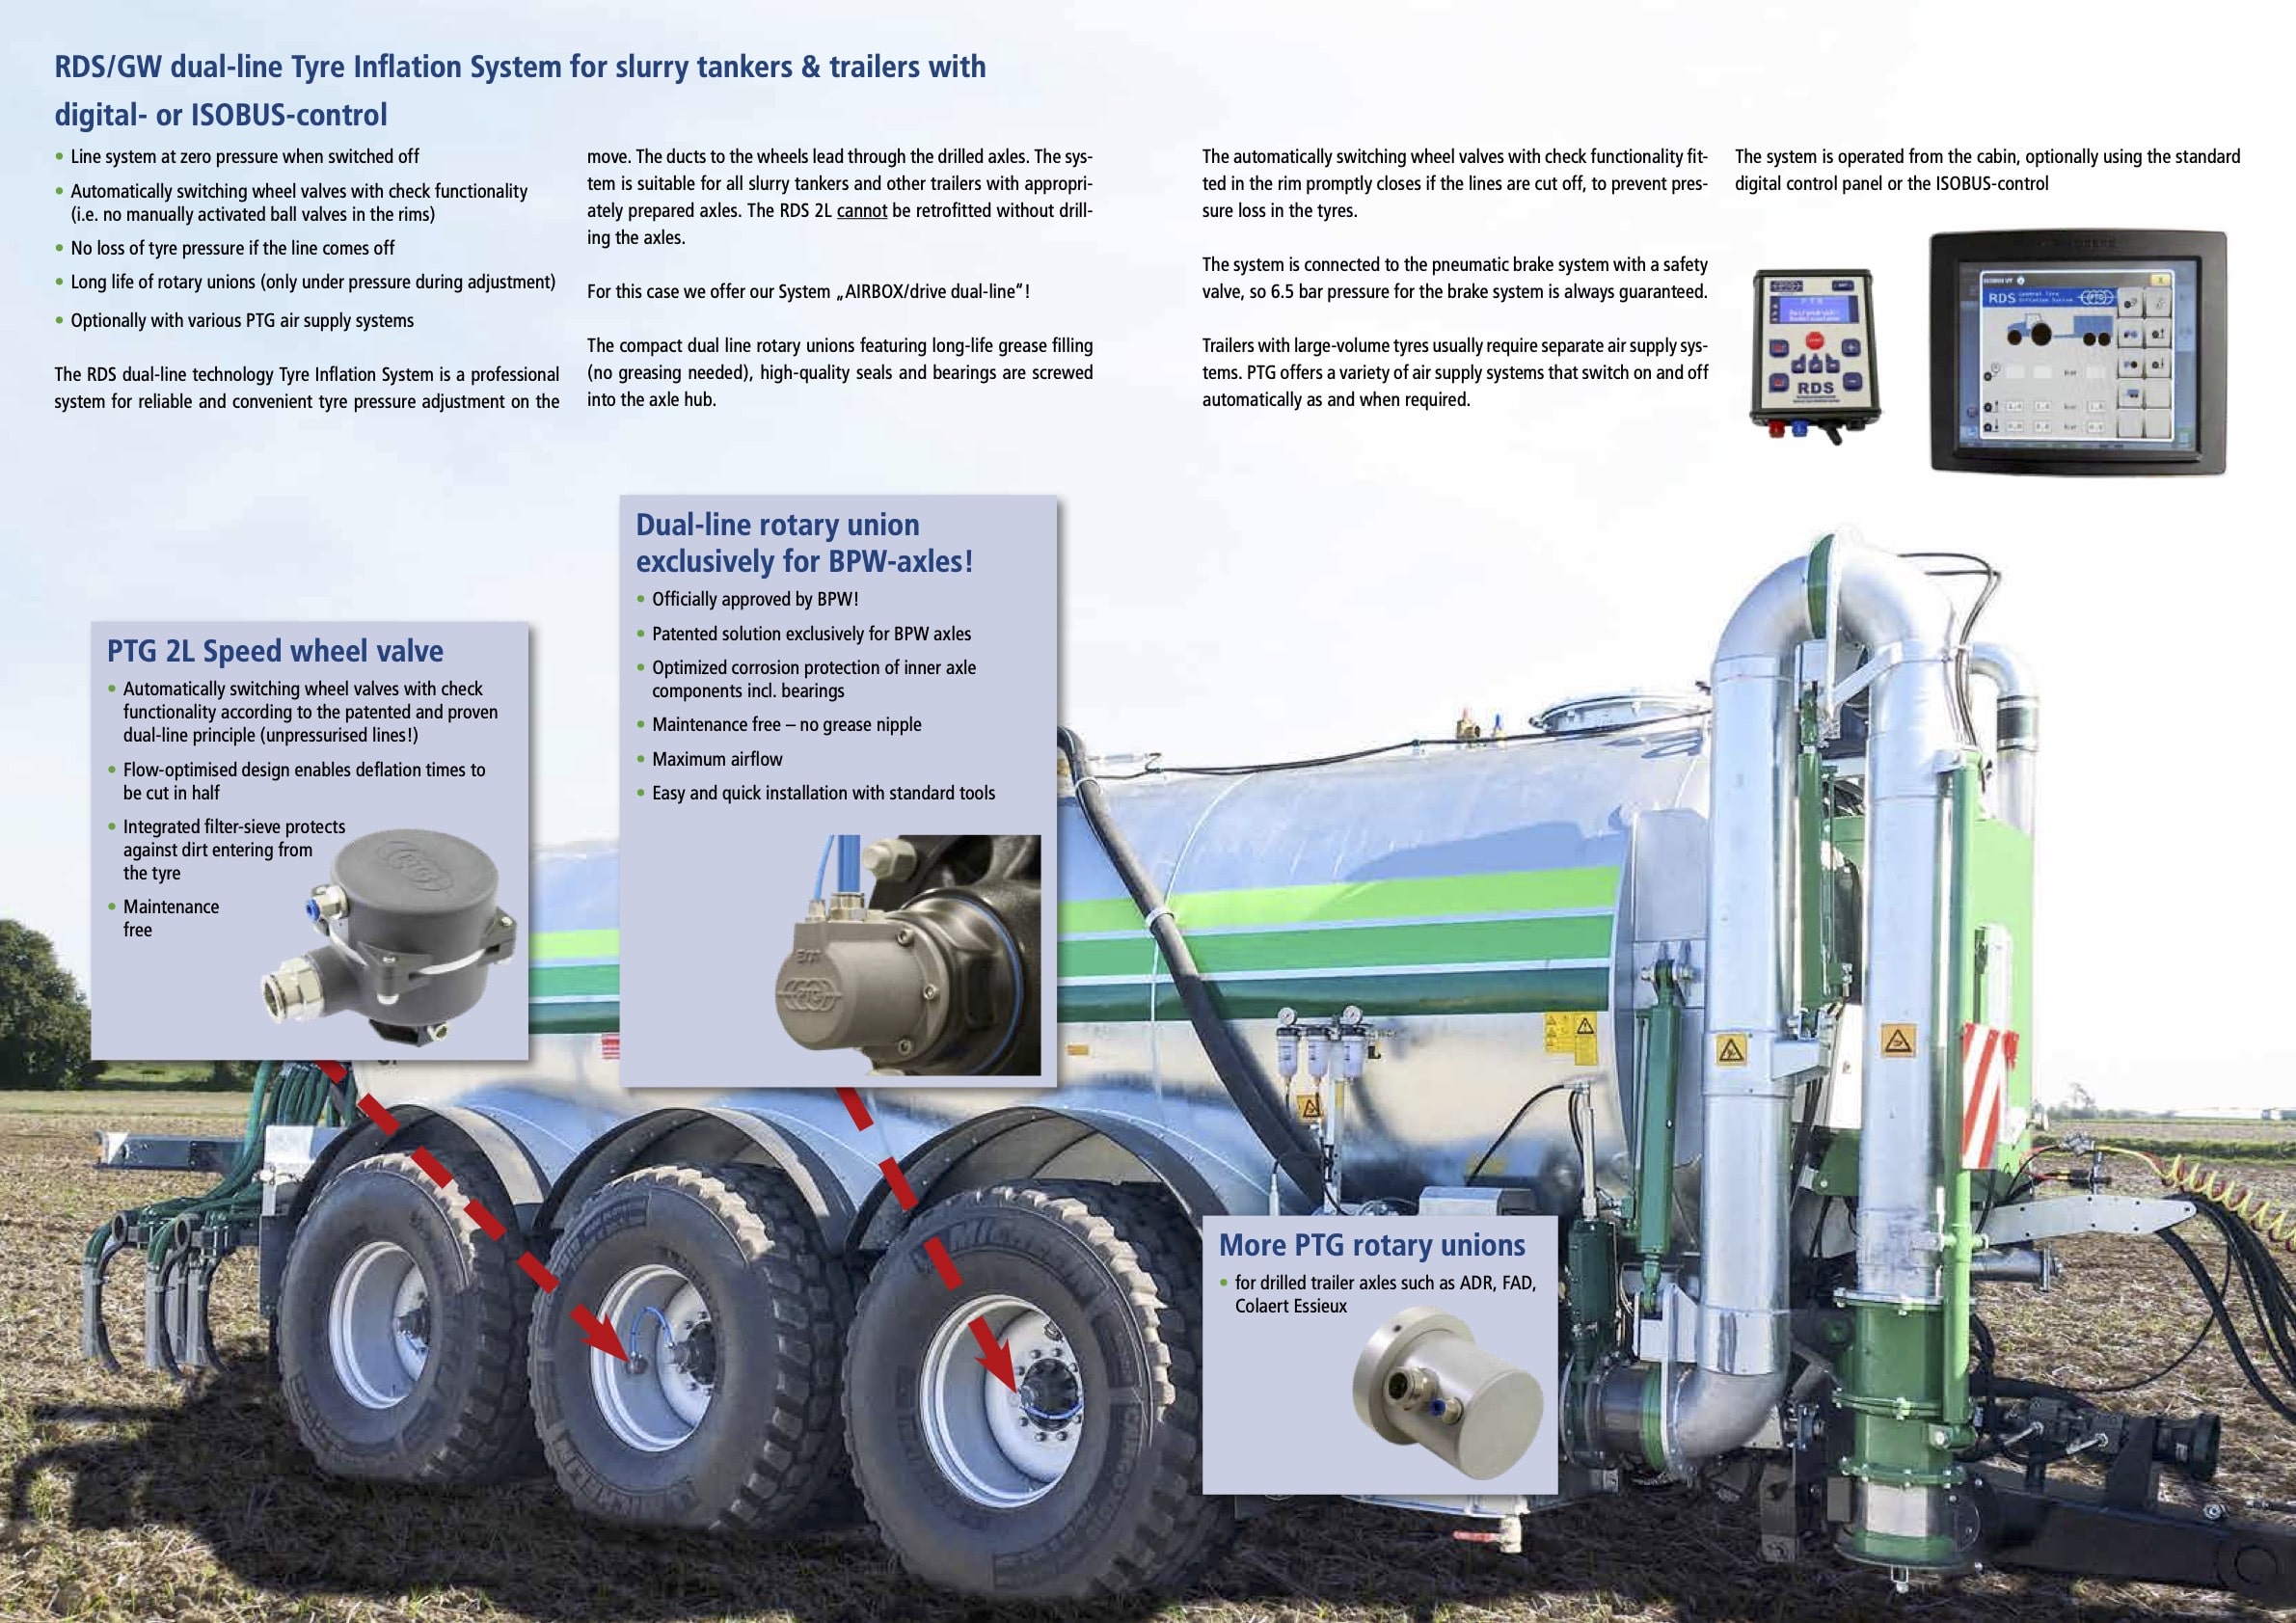 AIRBOX/drive 2L for Slurry Tankers and Trailers